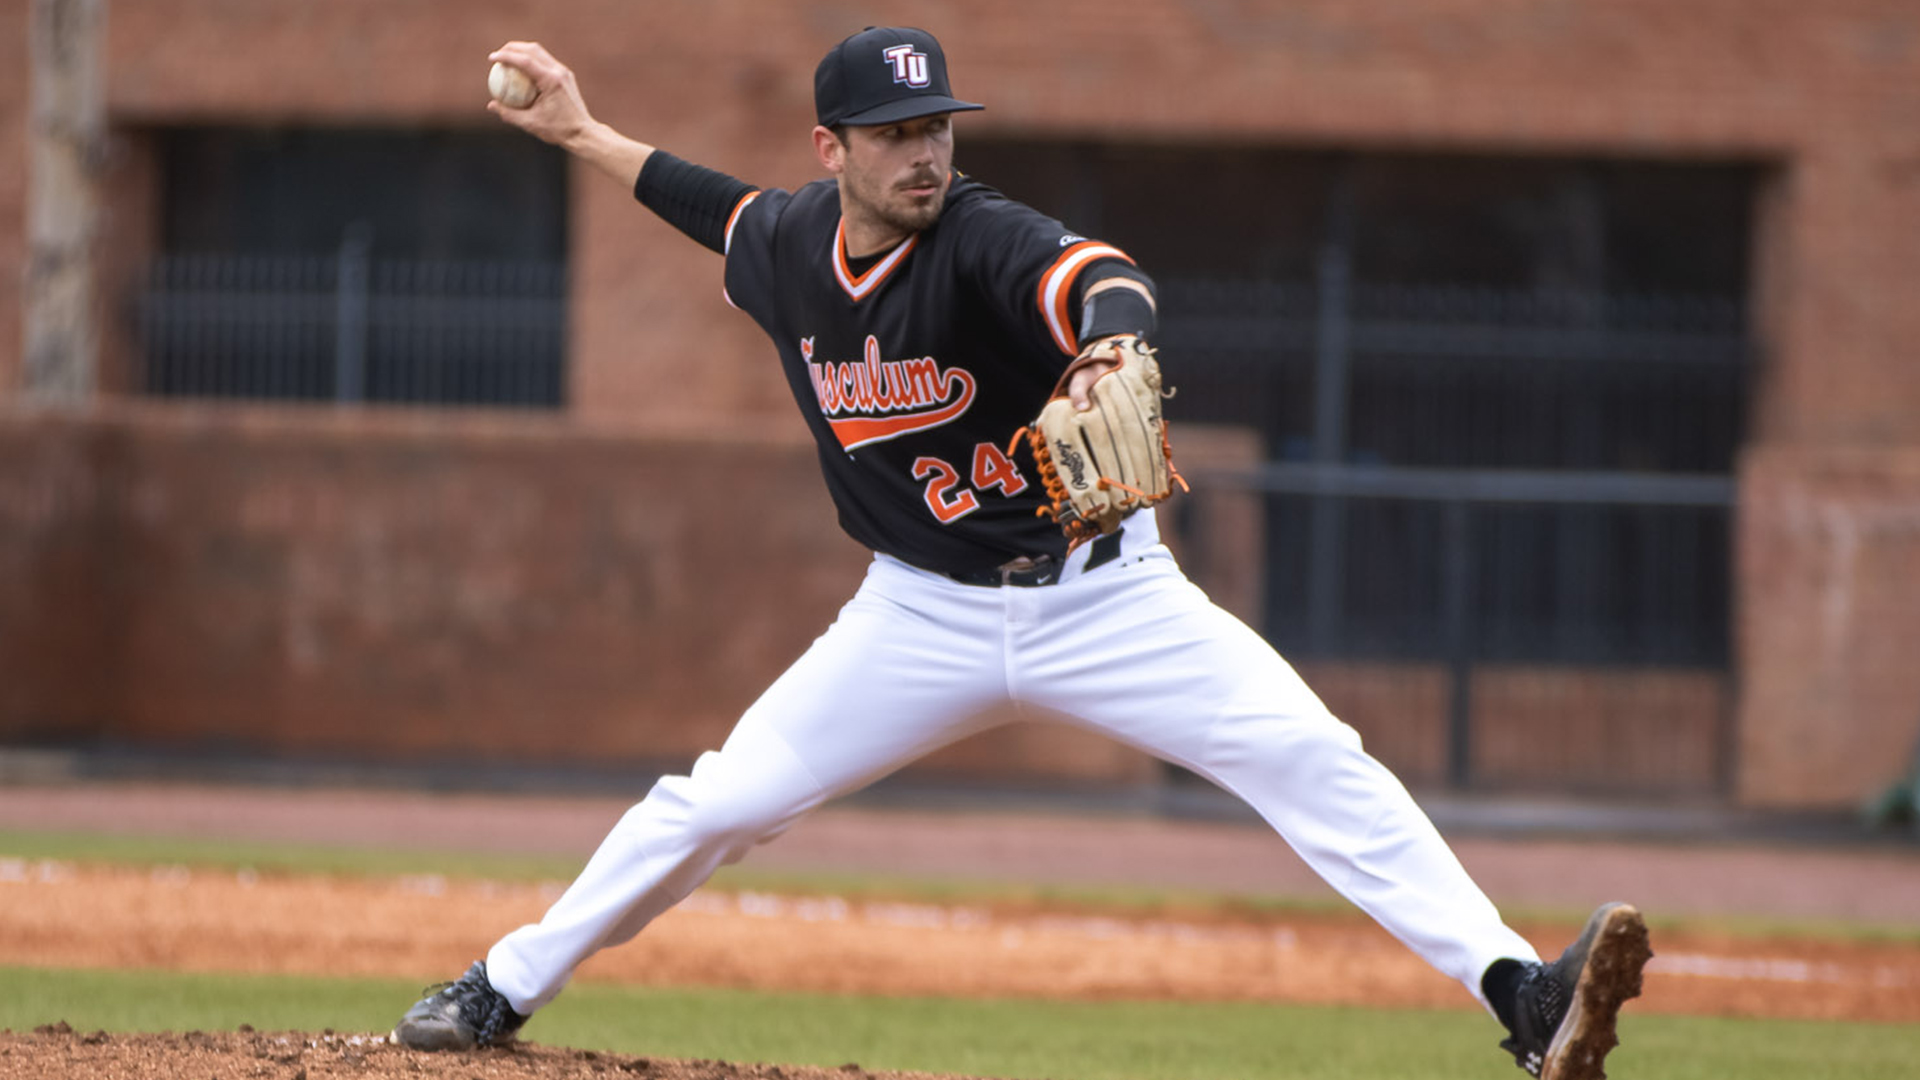 Brice Anders recorded the win in the series finale for Tusculum baseball (photo by Kari Ham).